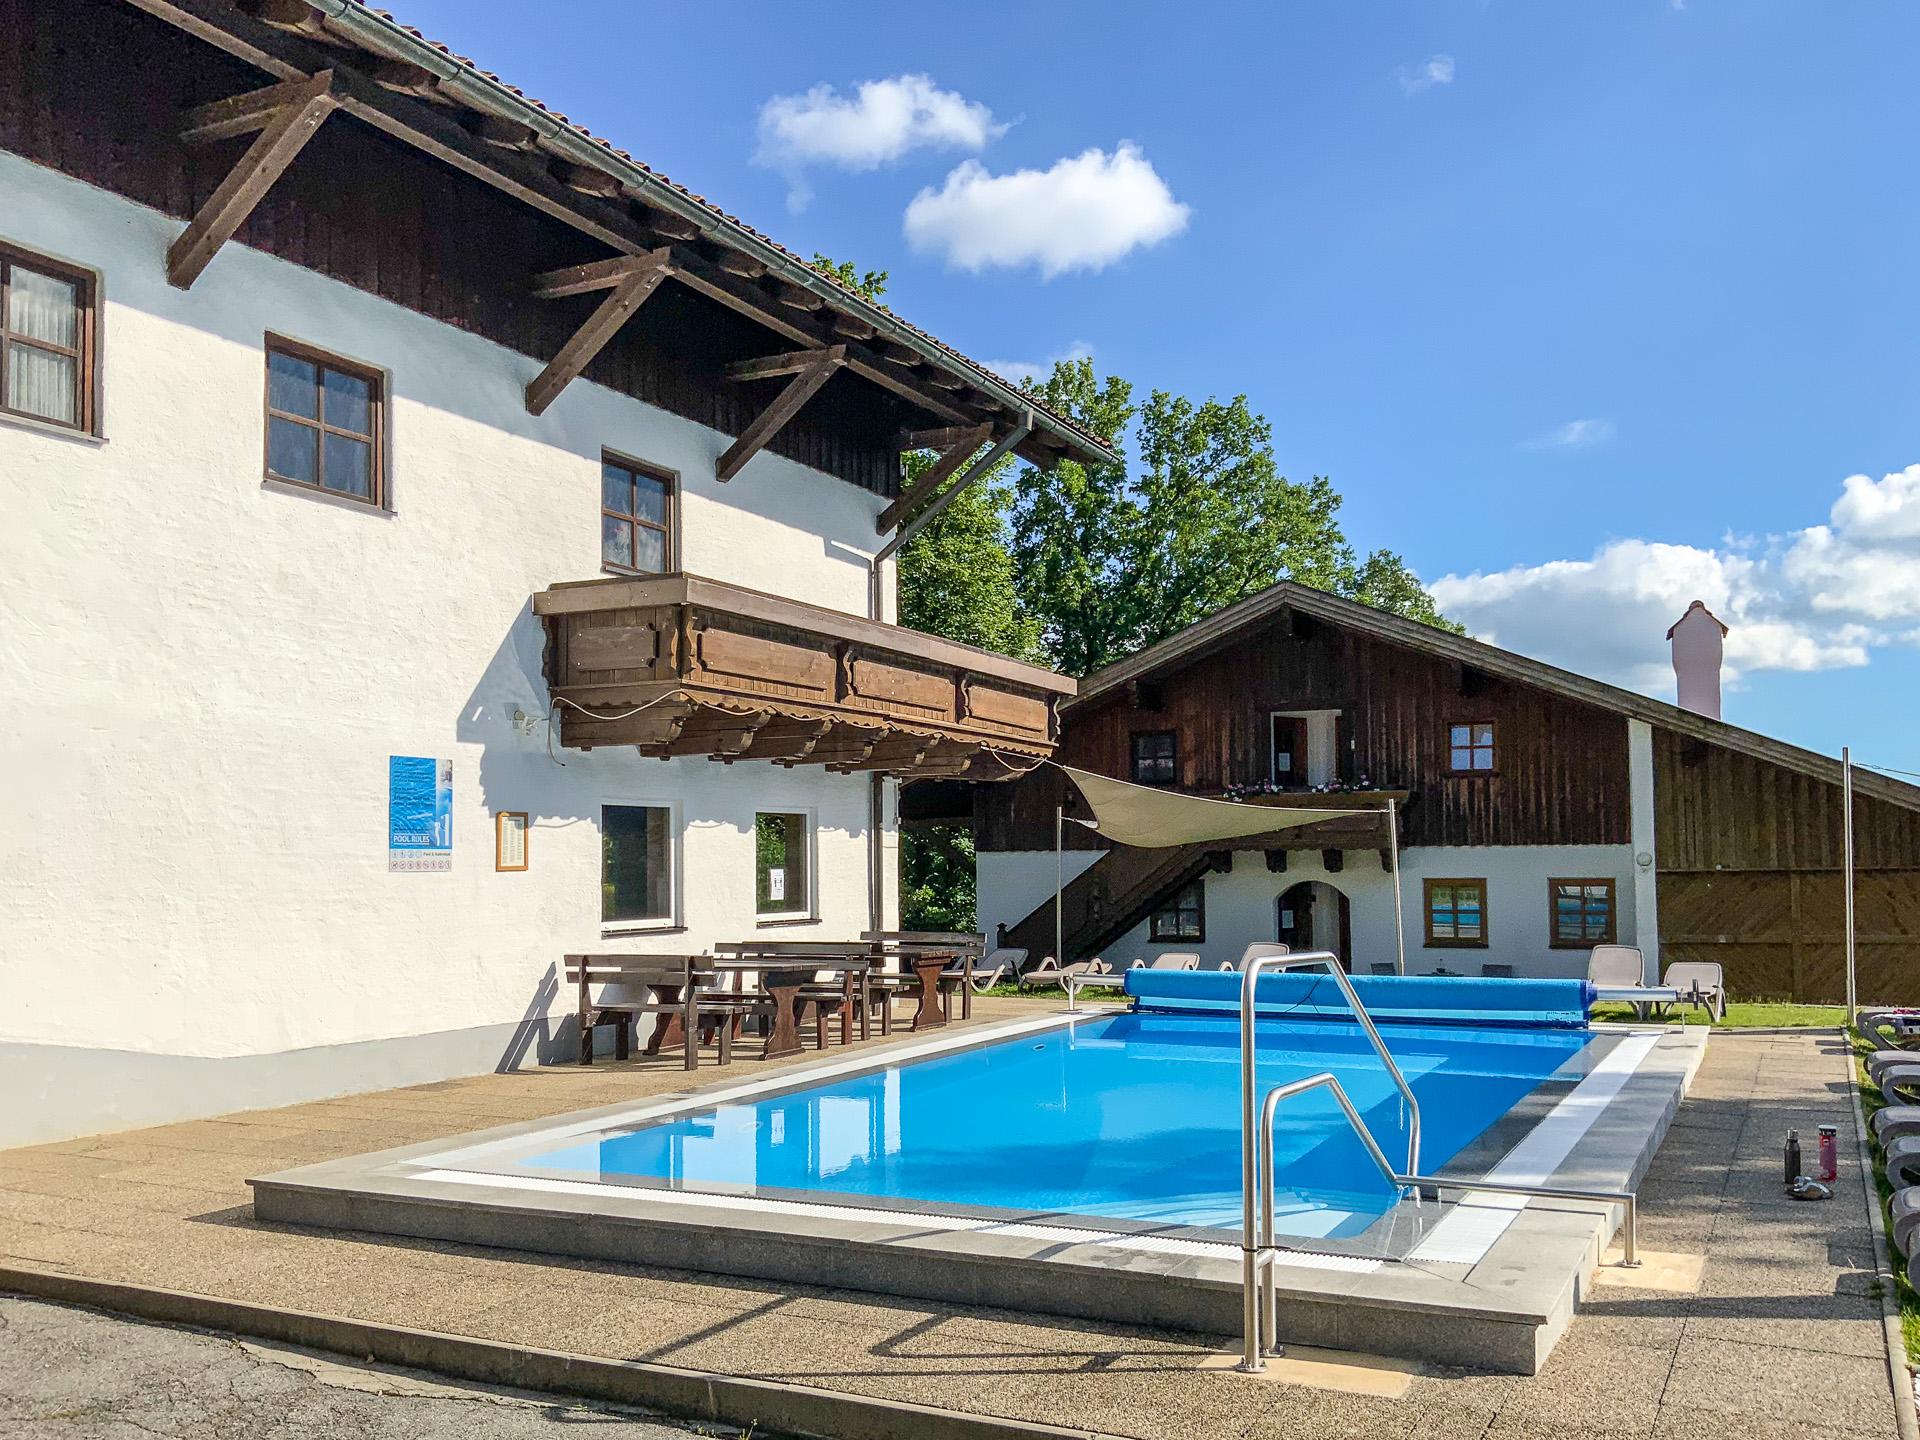 Apartment in the Bavarian Forest with a summer pool